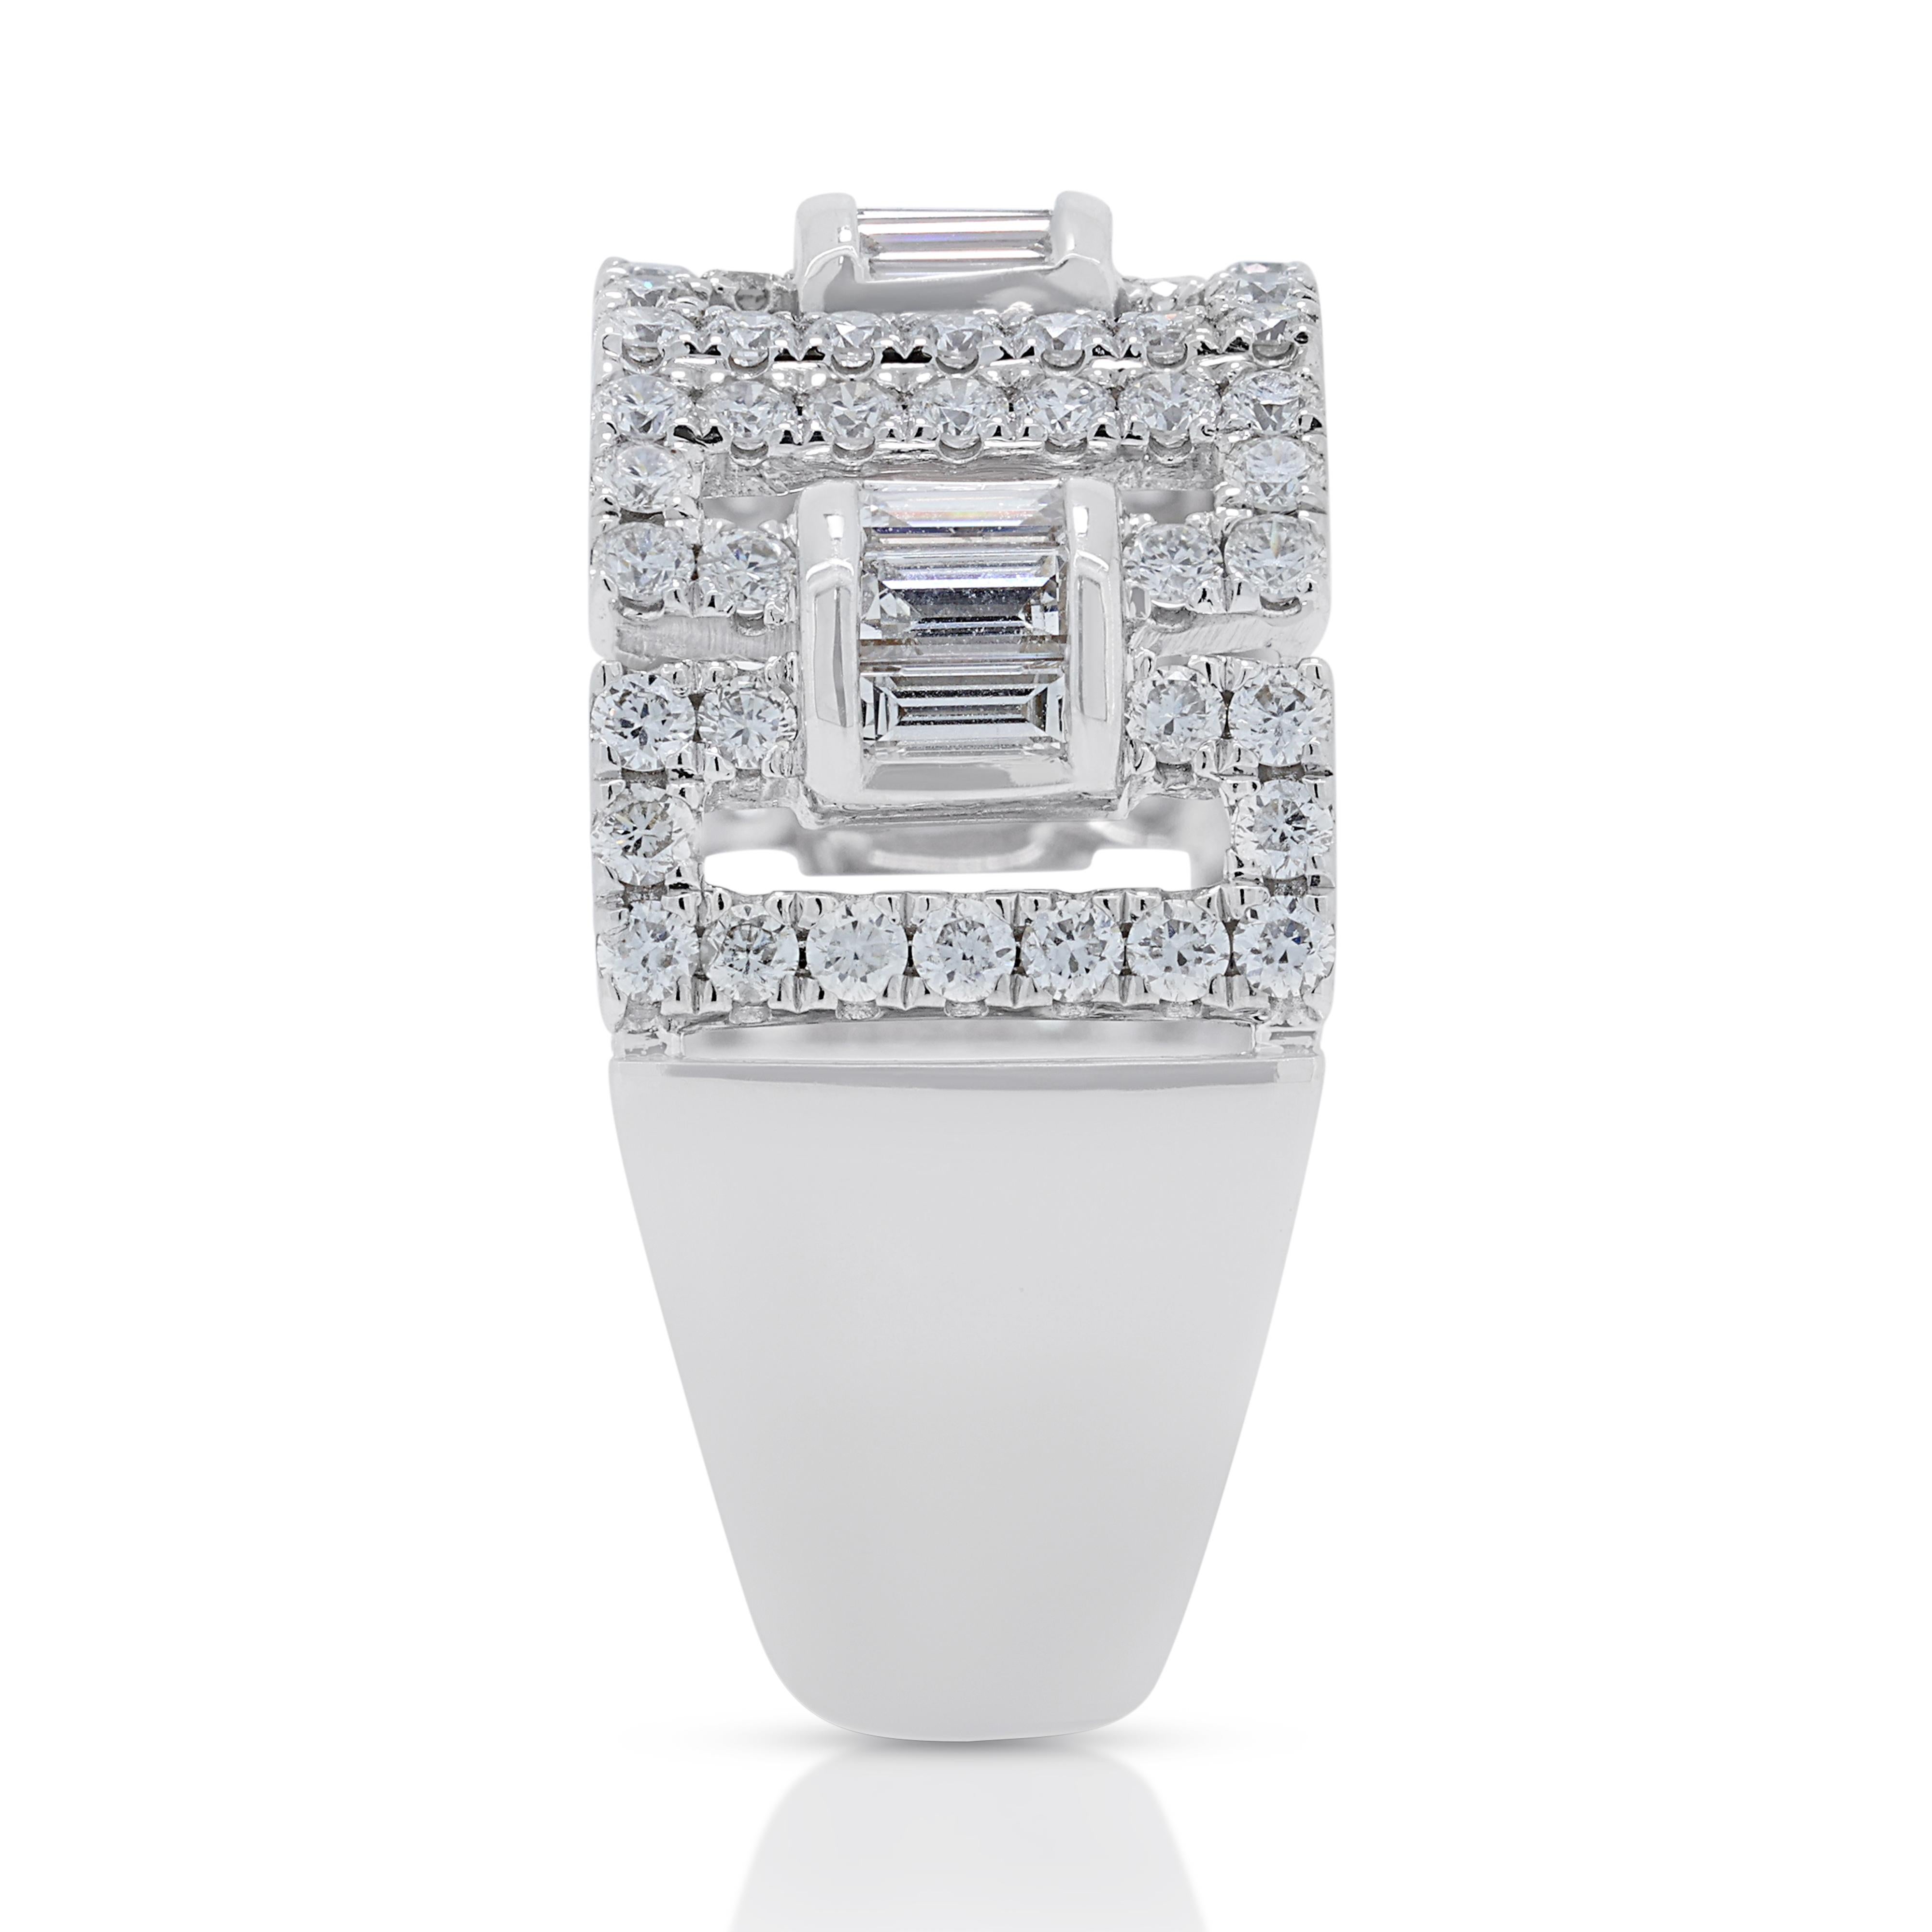 Shining 0.72ct Diamond Pave Ring in 18K White Gold In Excellent Condition For Sale In רמת גן, IL